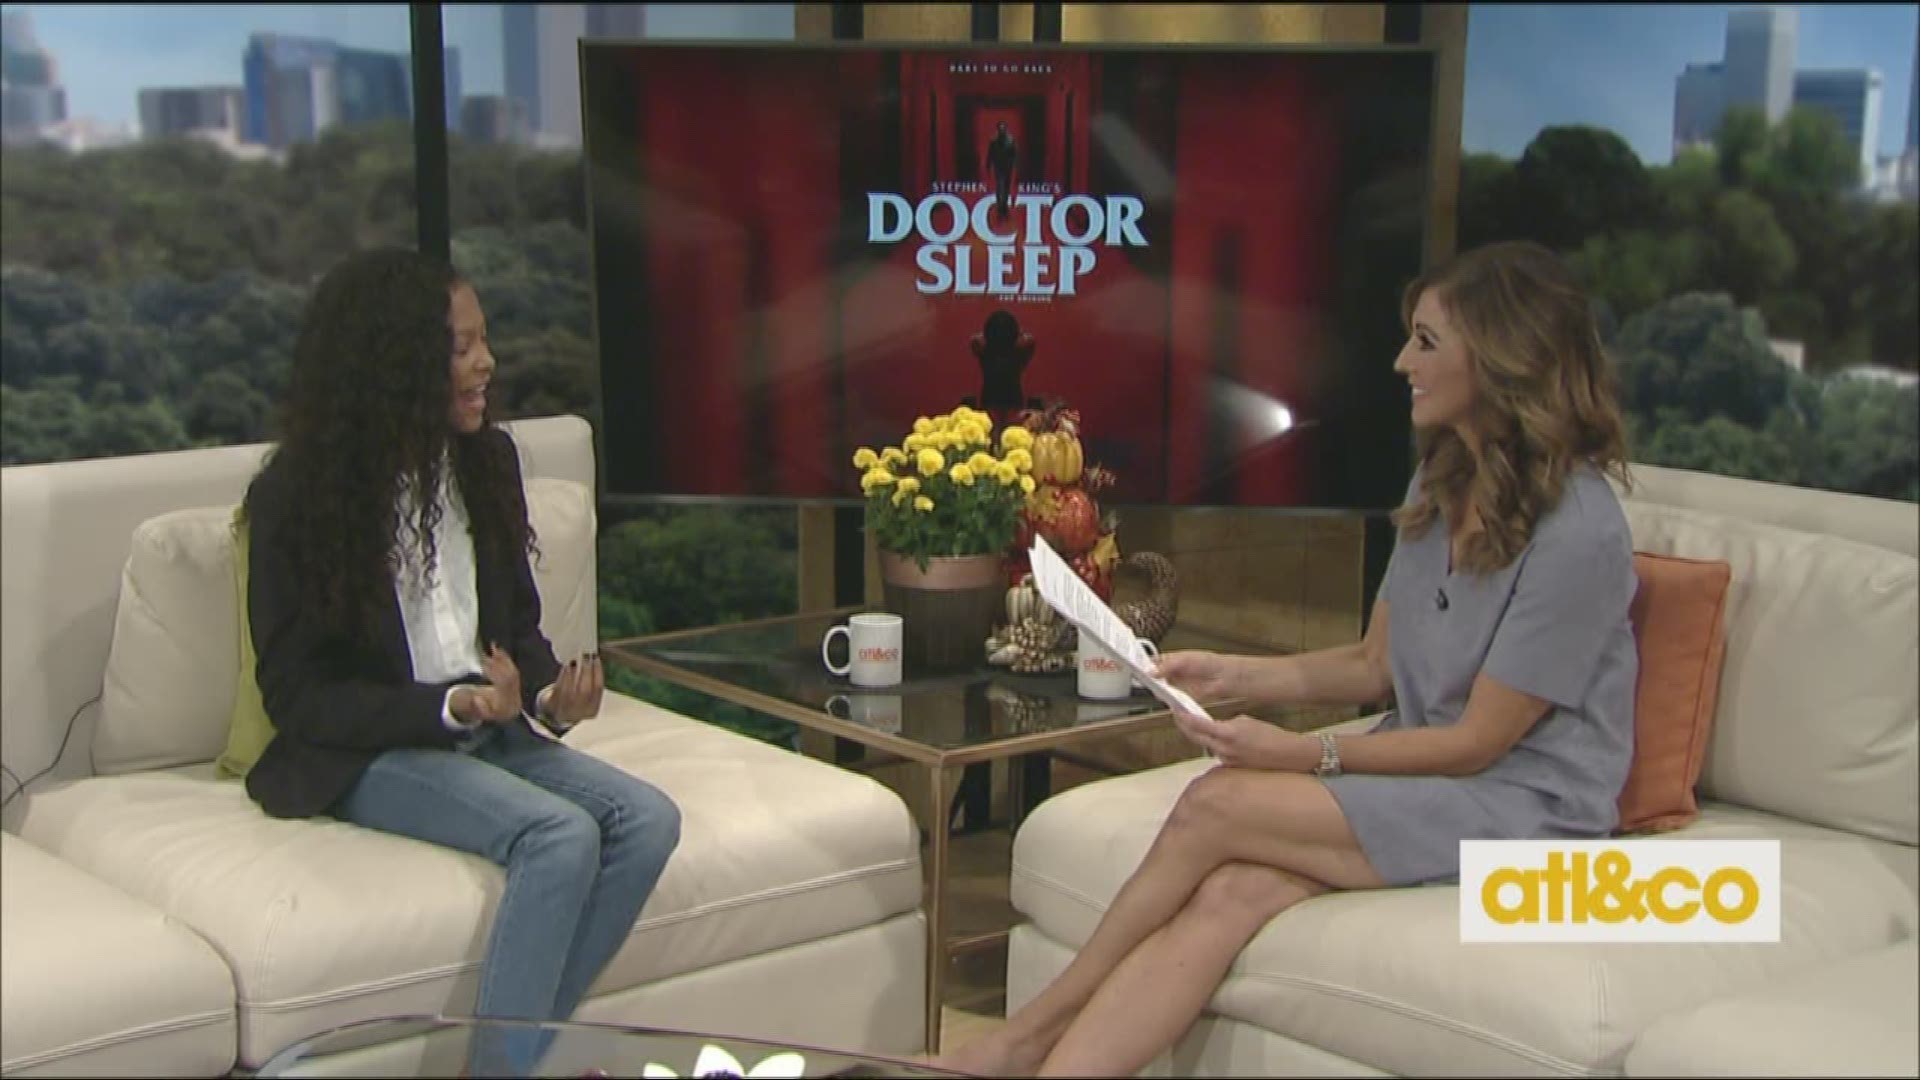 Young actress Kyliegh Curran previews her new movie 'Doctor Sleep,' the sequel to Stephen King's 'The Shining.'